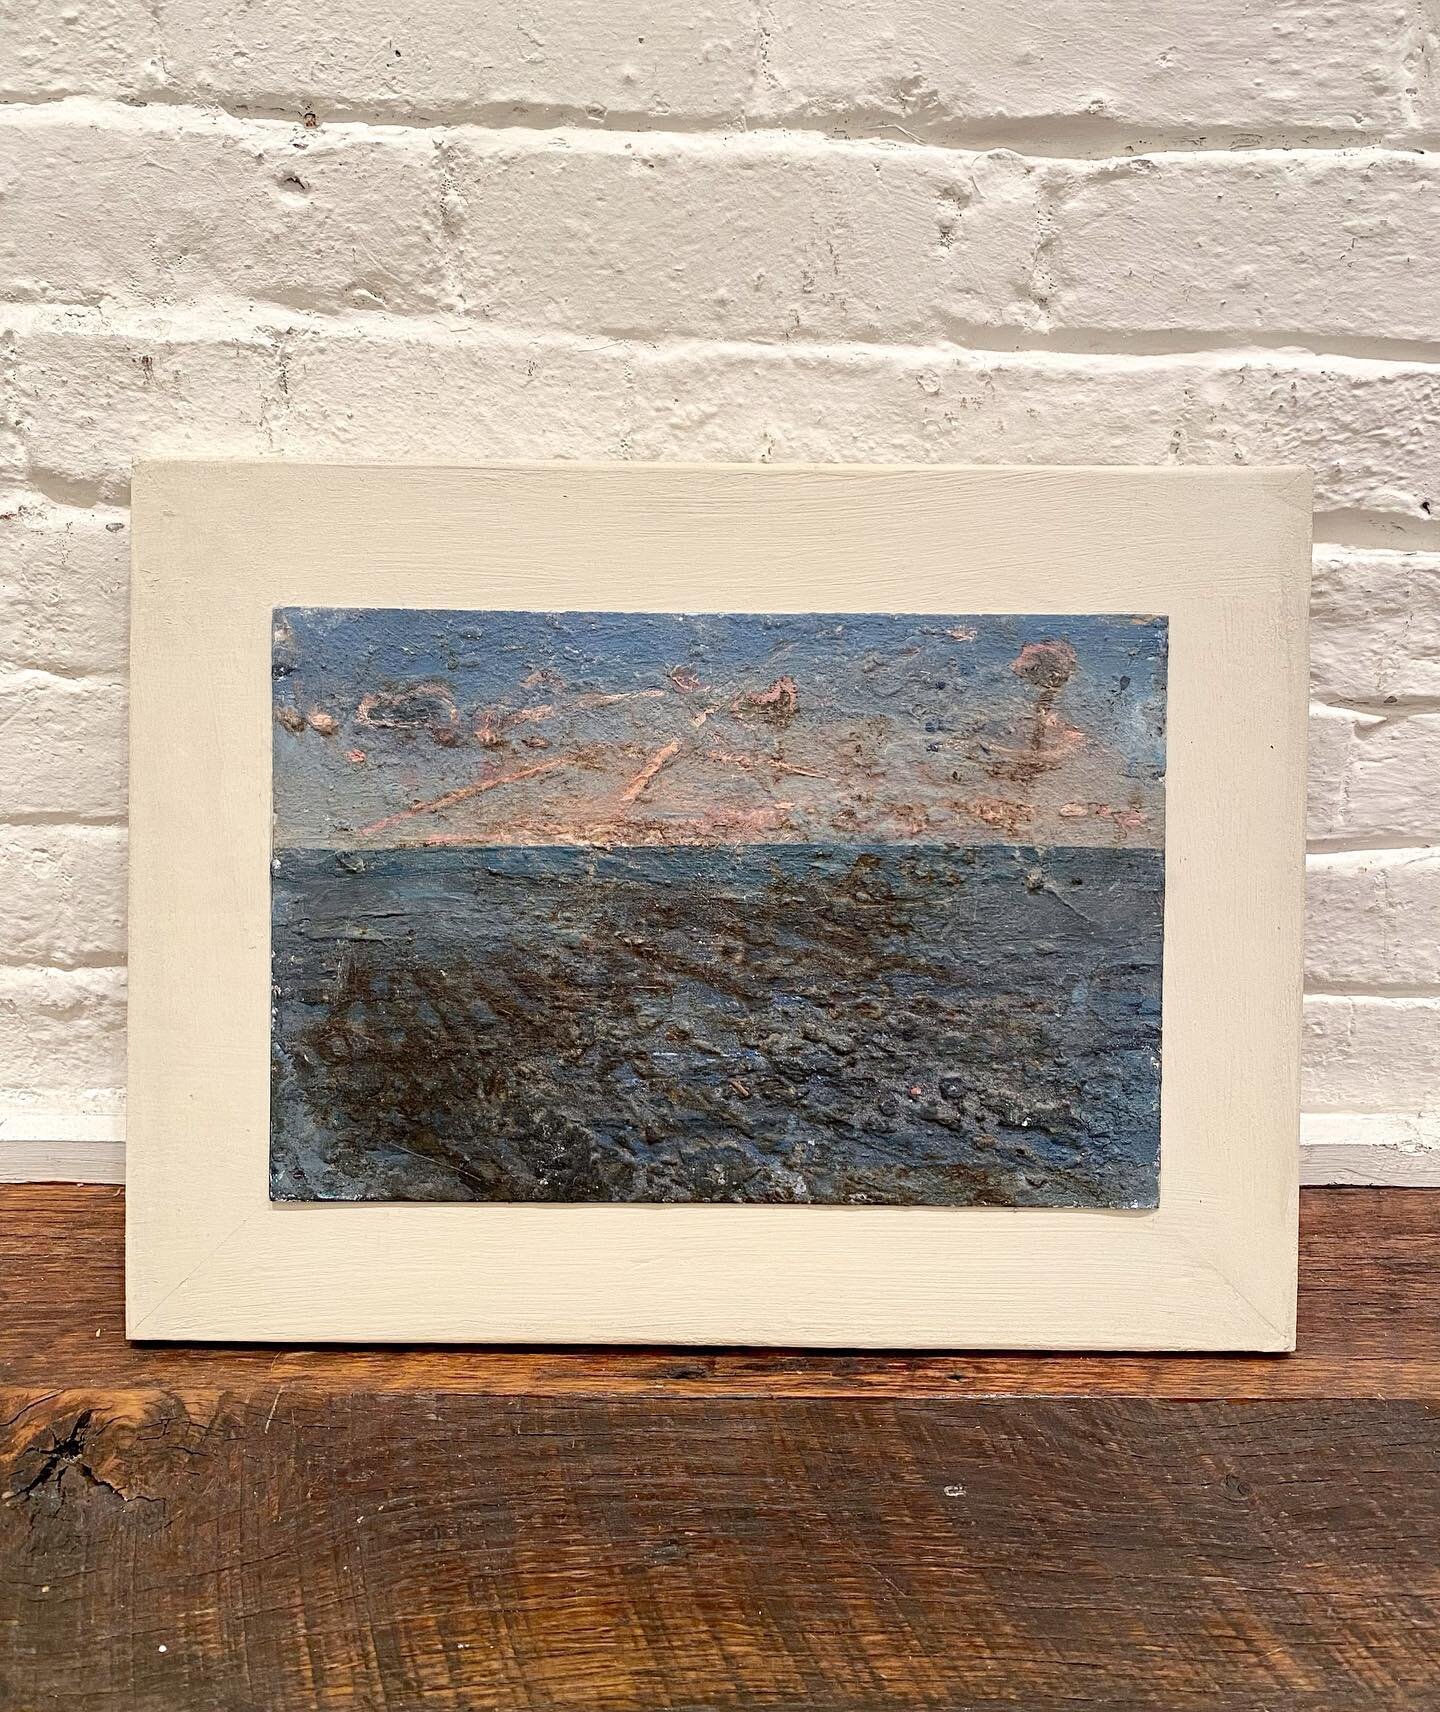 &lsquo;Mouth of the Anclote&rsquo; by new to the gallery painter Kurt Knobelsdorf. Beautiful color, texture, and rawness that draw you into the paintings. #painting #ocean #kurtknobelsdorf